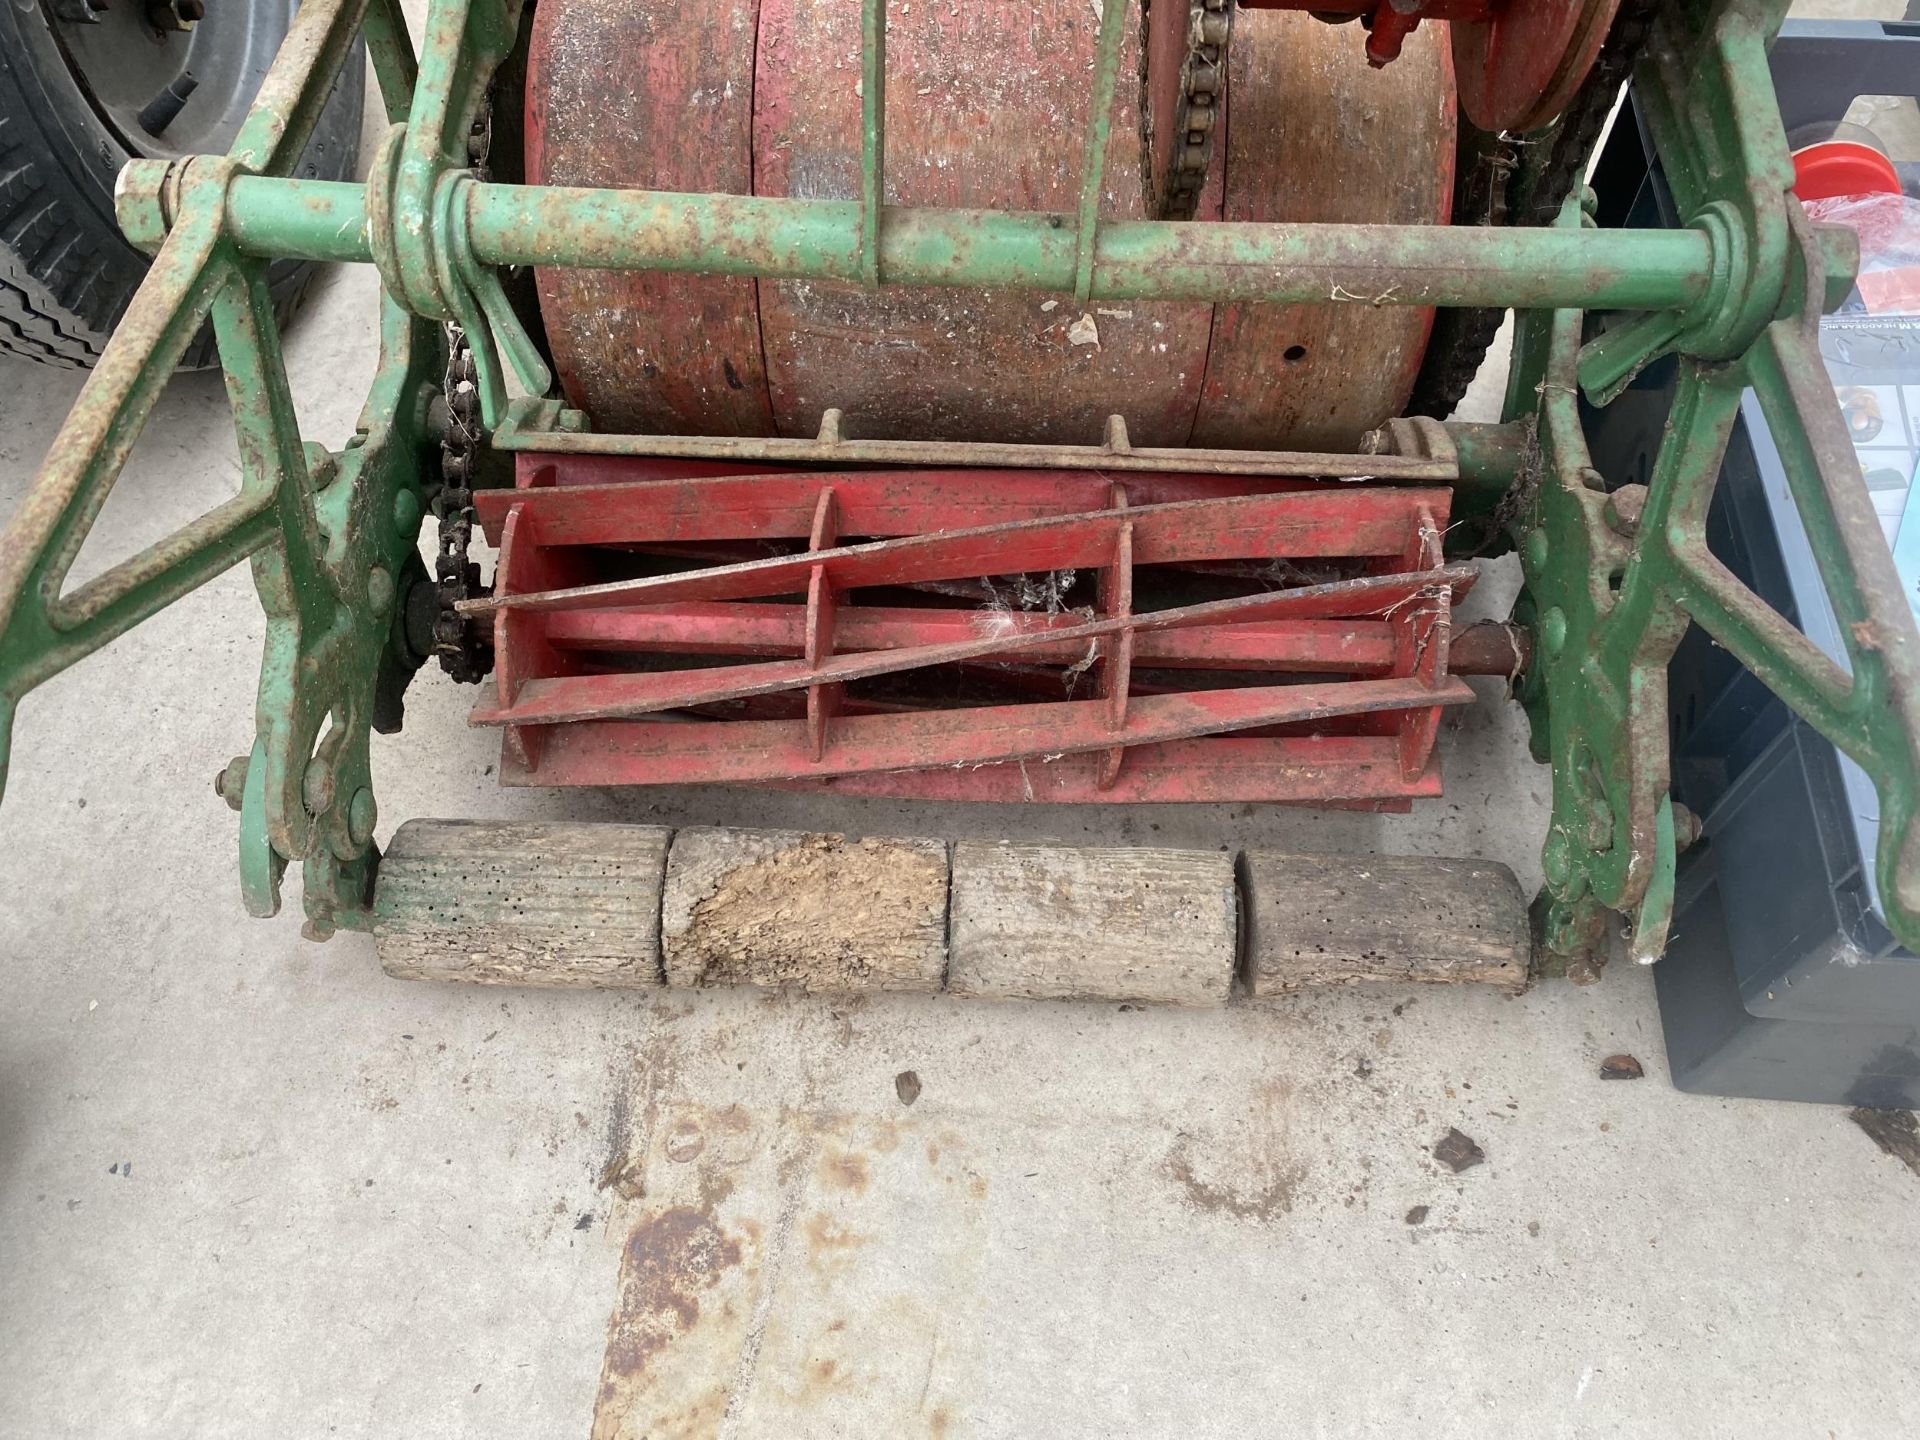 A VINTAGE ATCO PETROL LAWN MOWER - Image 2 of 3